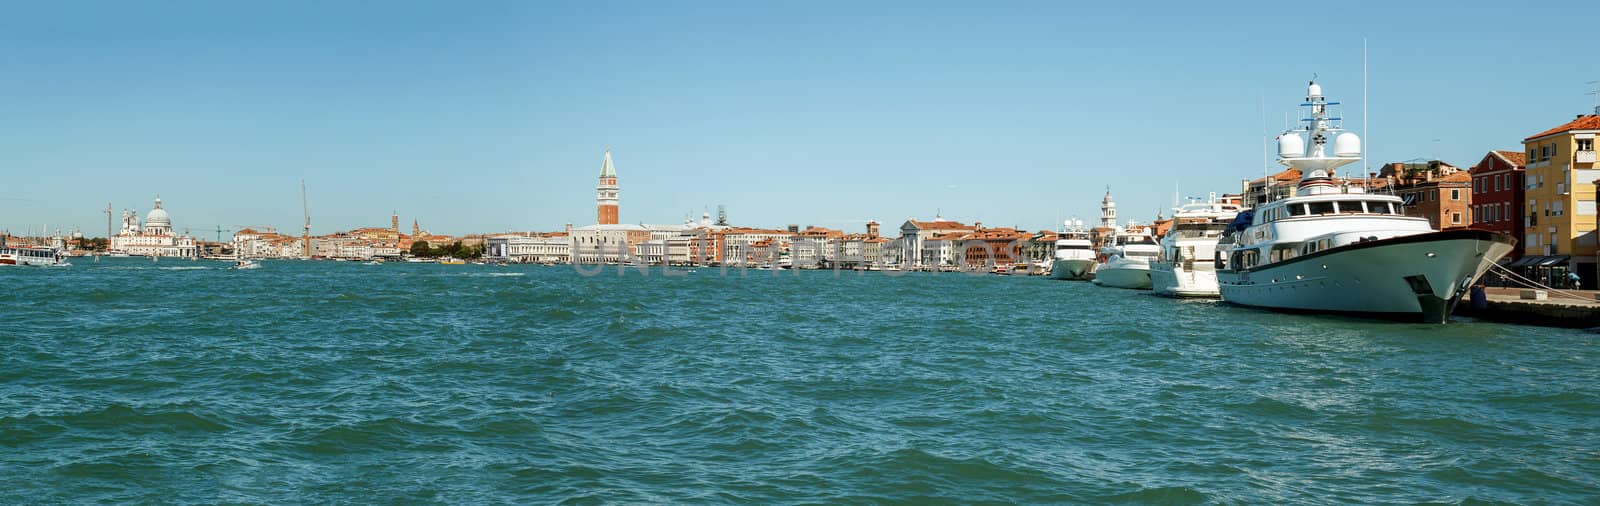 Panorama of Venice  Italy  view from sea